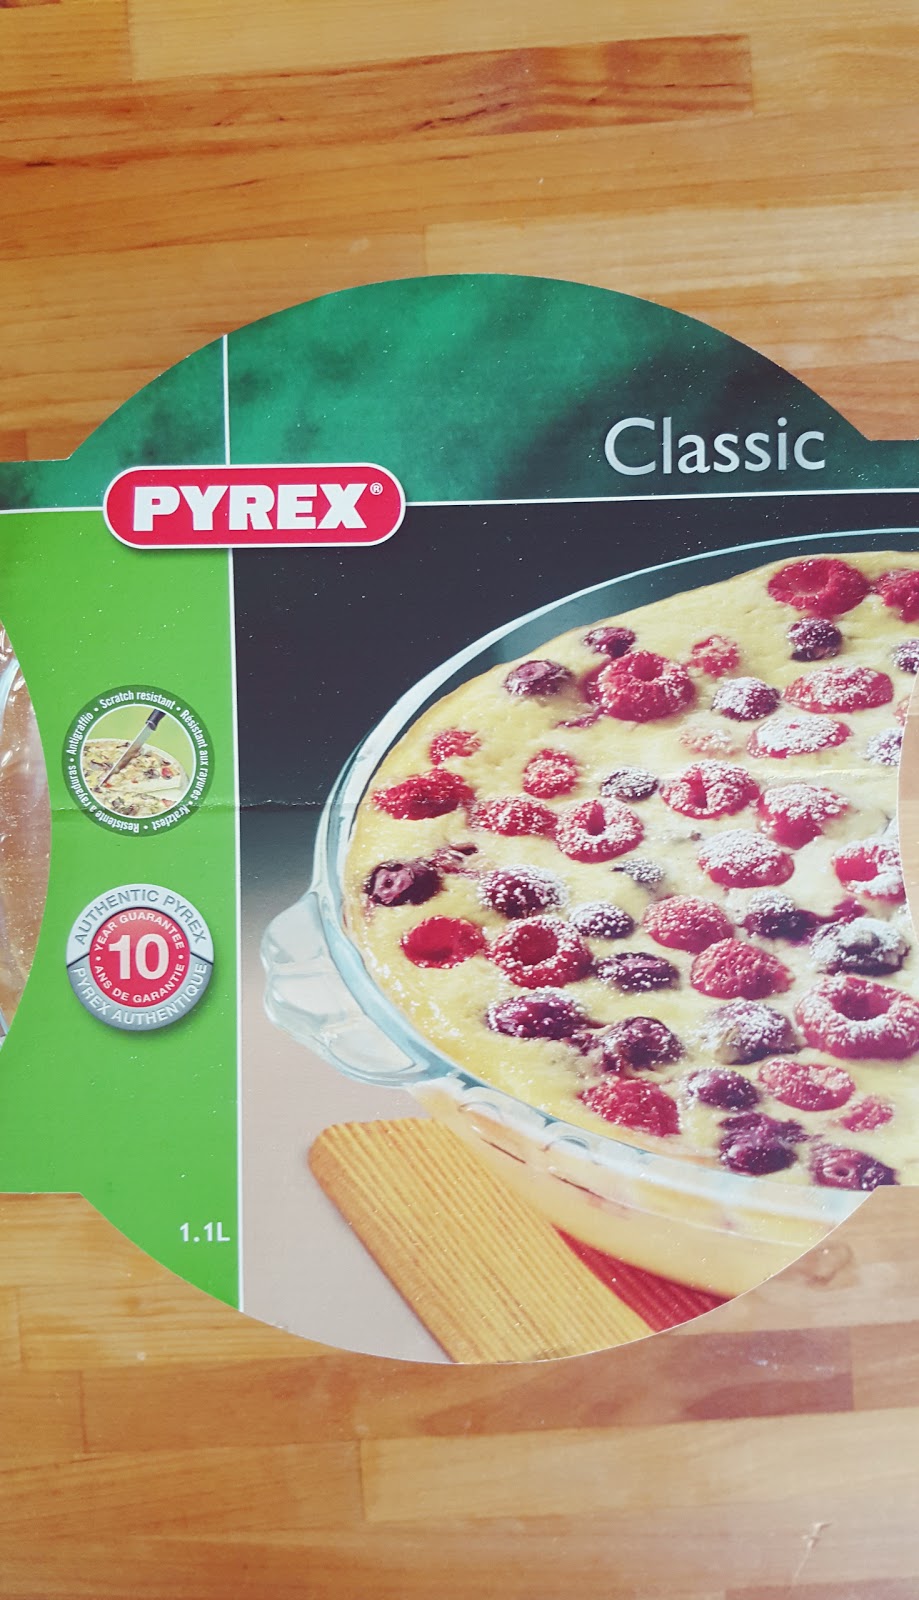 Pyrex Cake Dish Review And What I Thought: